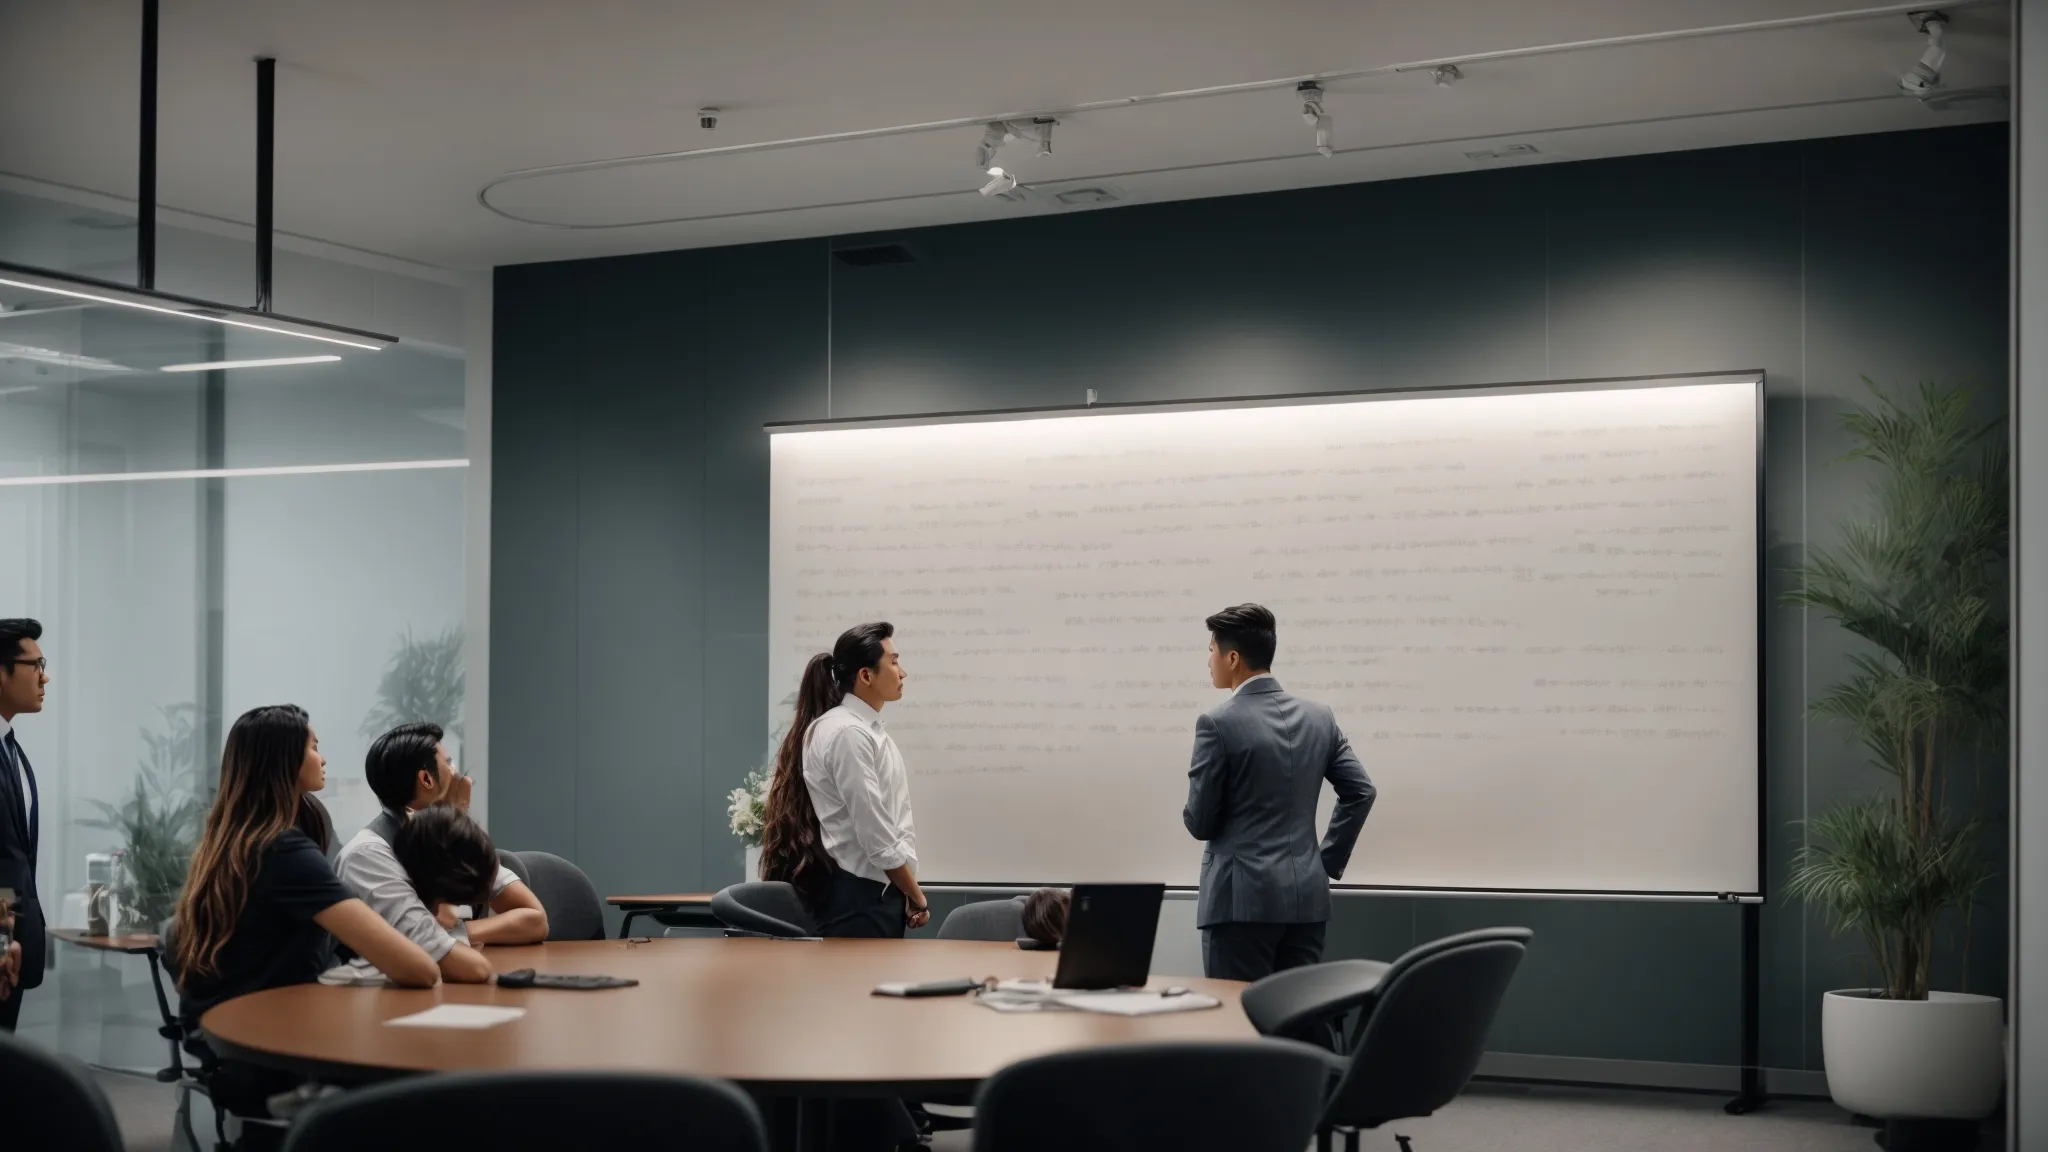 a meeting room with a large whiteboard filled with words and topics, surrounded by a focused team deep in discussion.